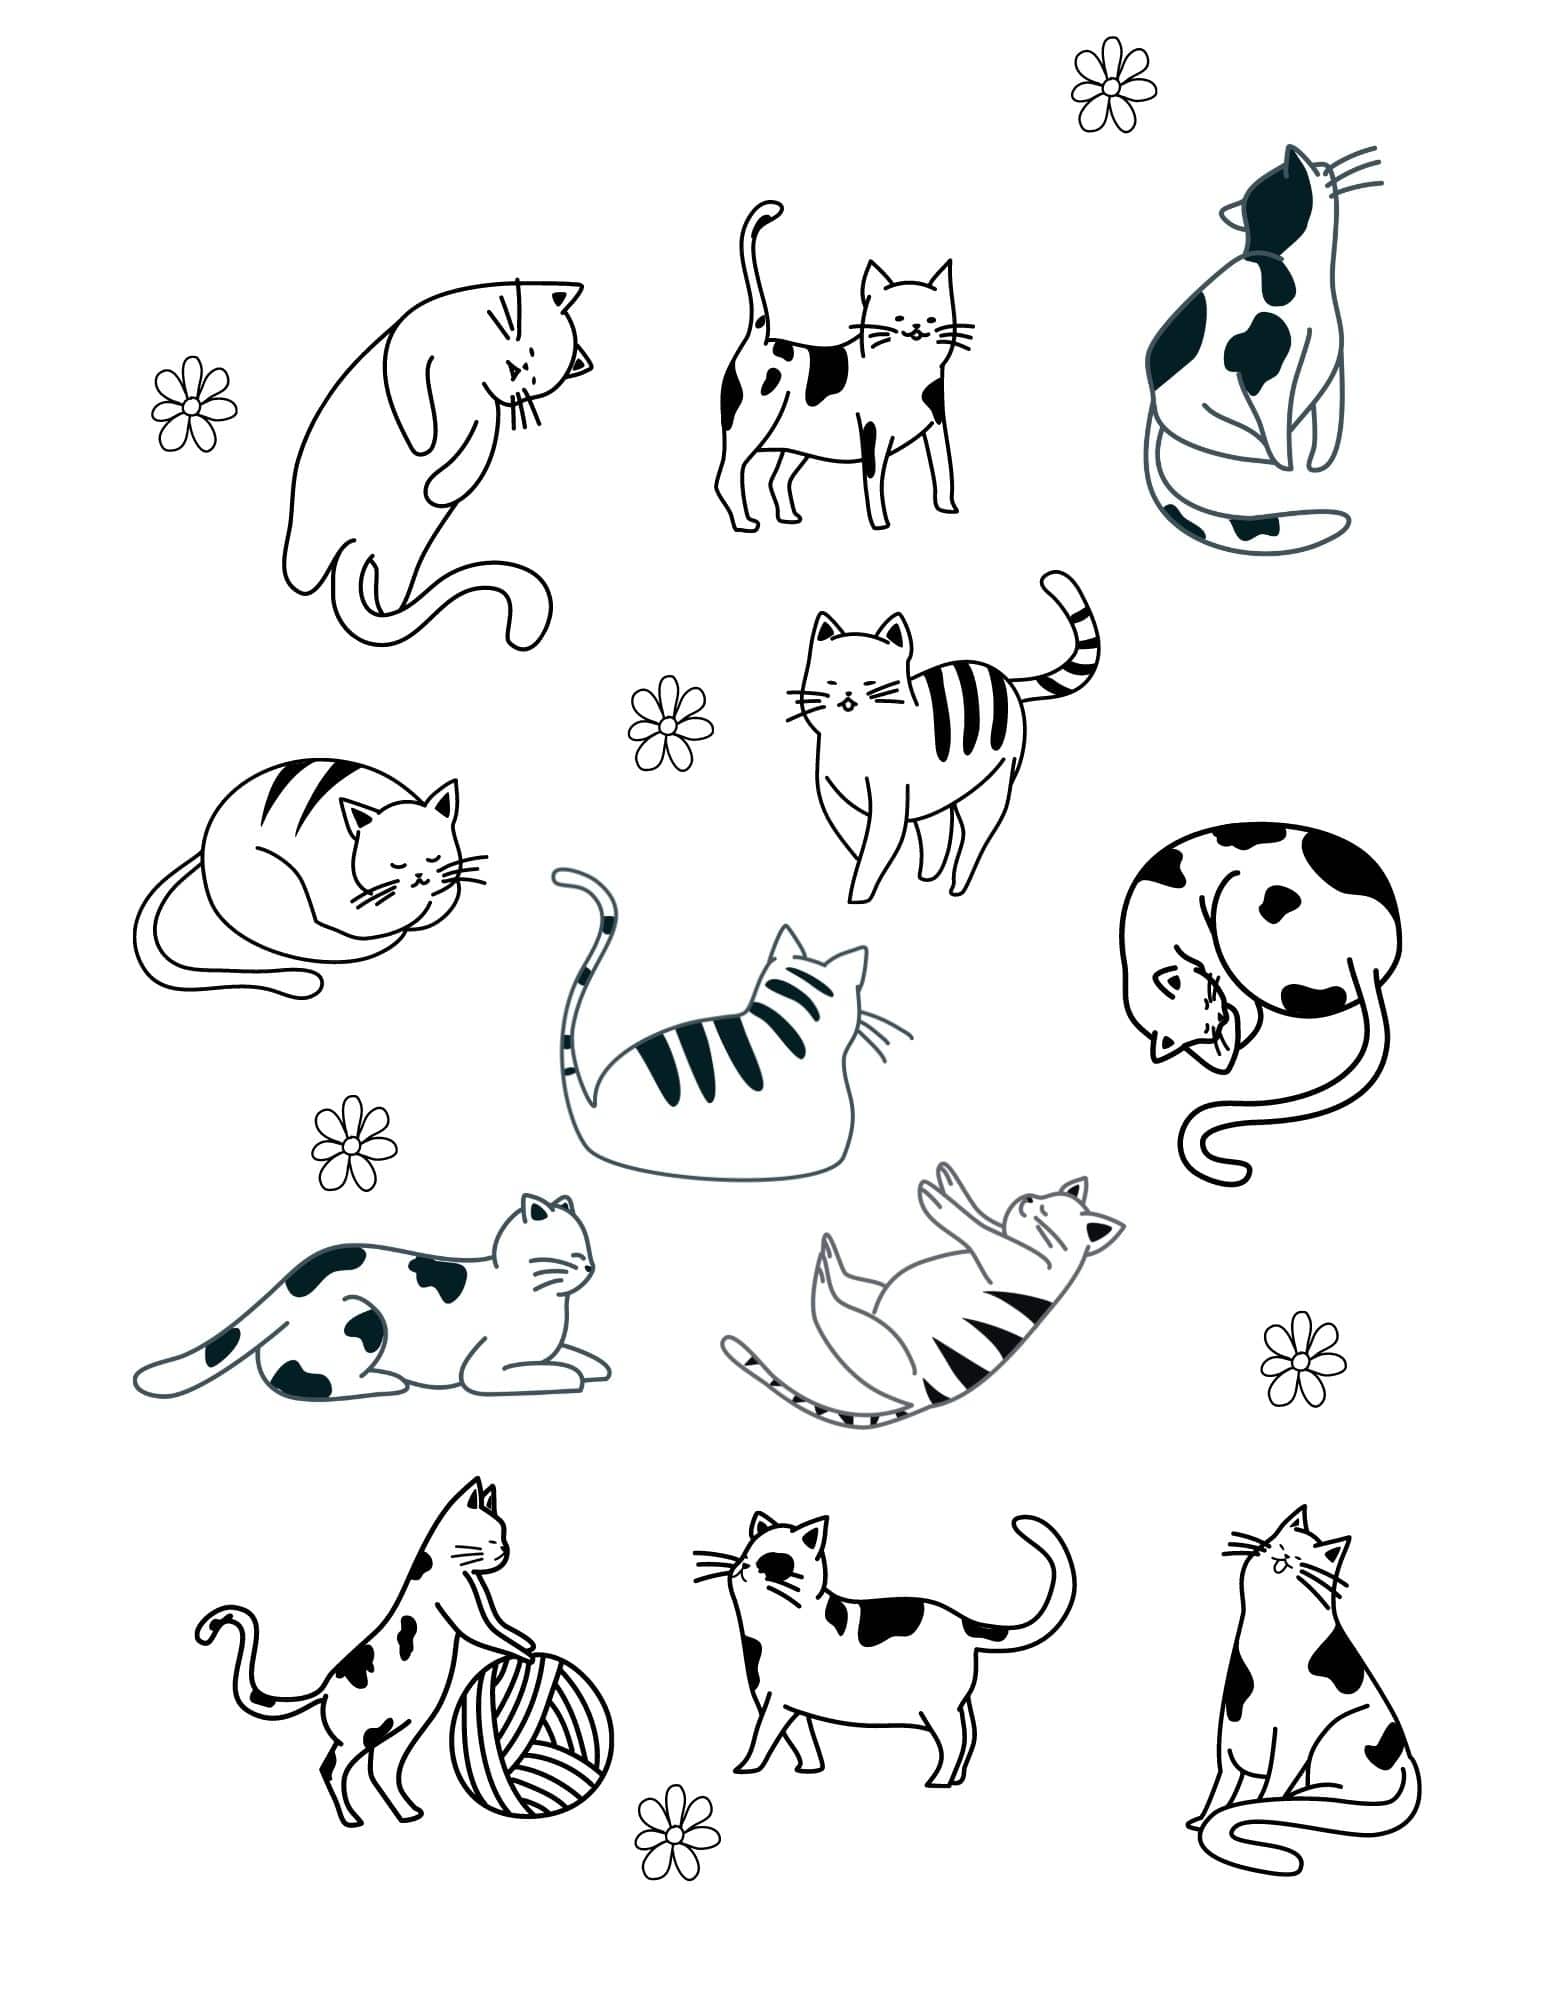 Cute cat coloring pages for kids and adults